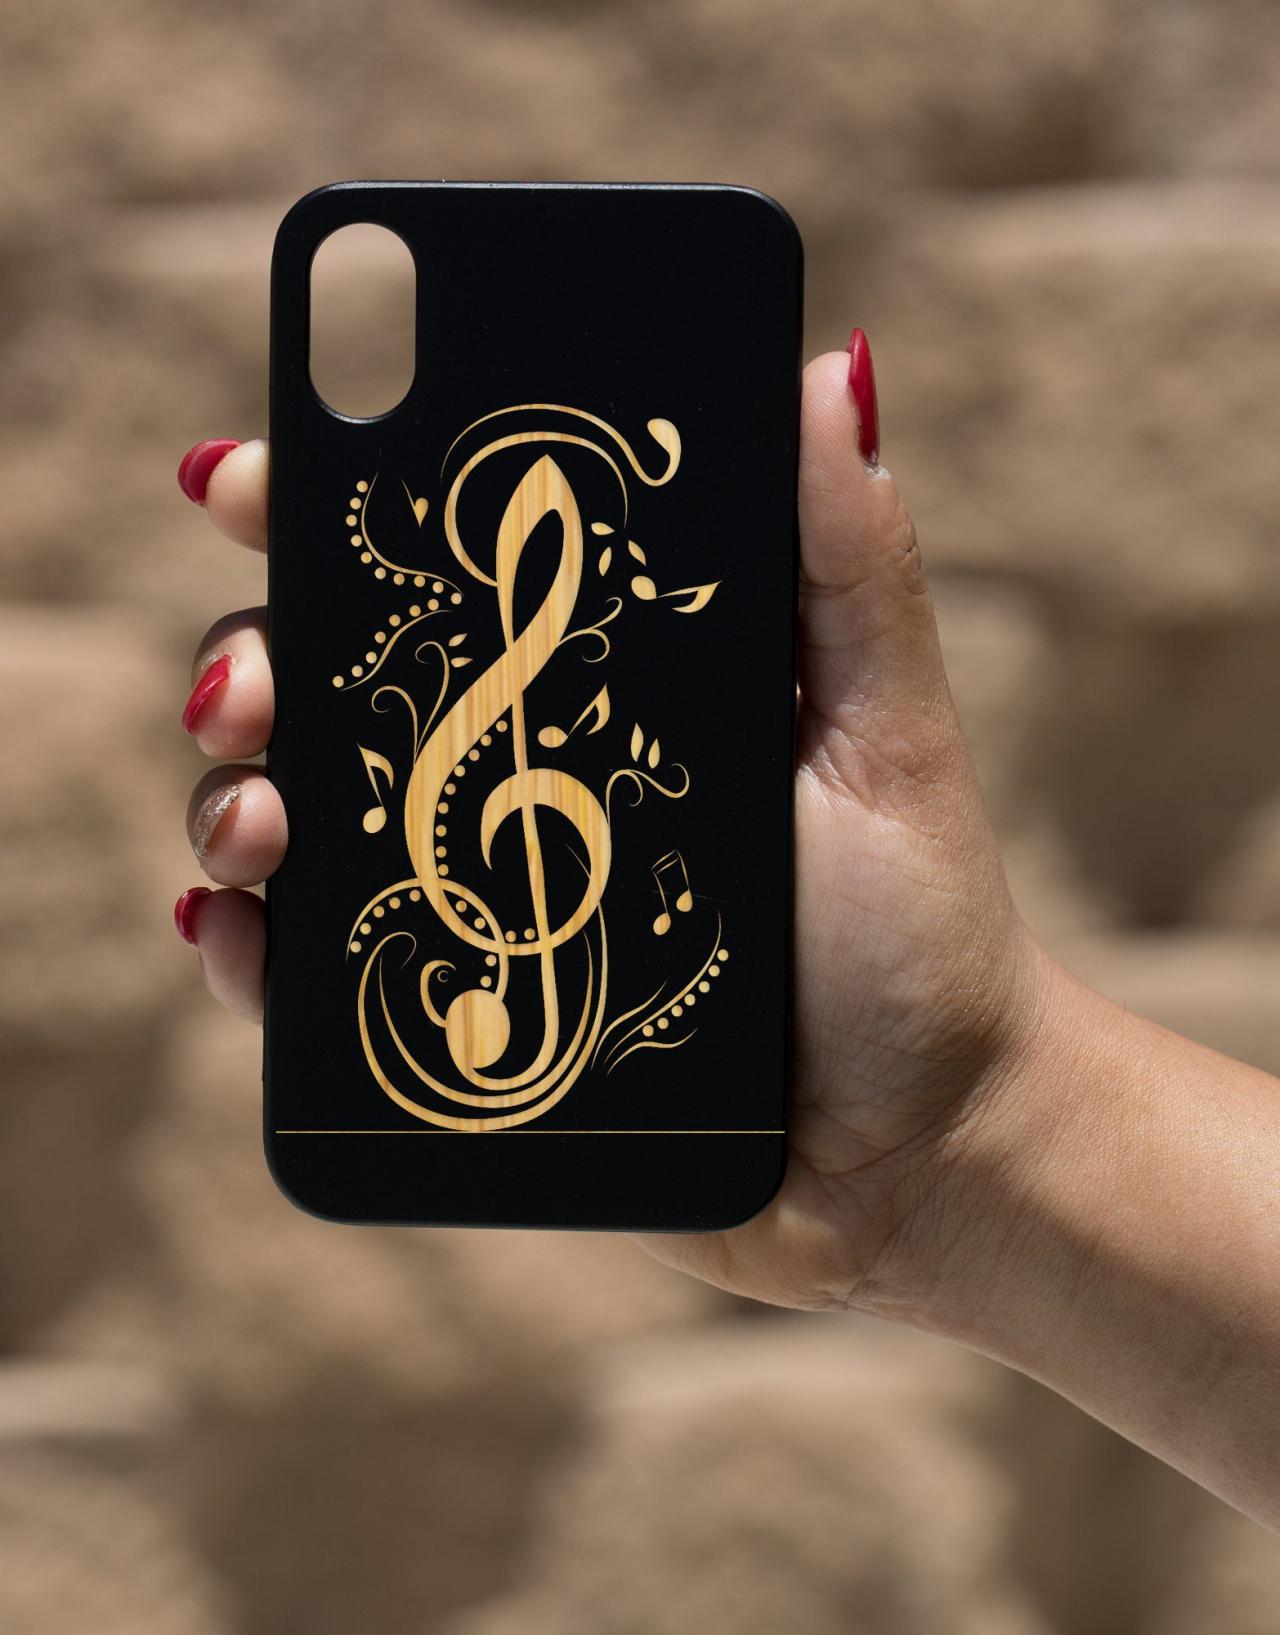 Music Notes IPhone X Case, Engraved Iphone X case, Wooden Engraved Iphone X Case, Iphone case, Beautiful Gift for here,unique case.